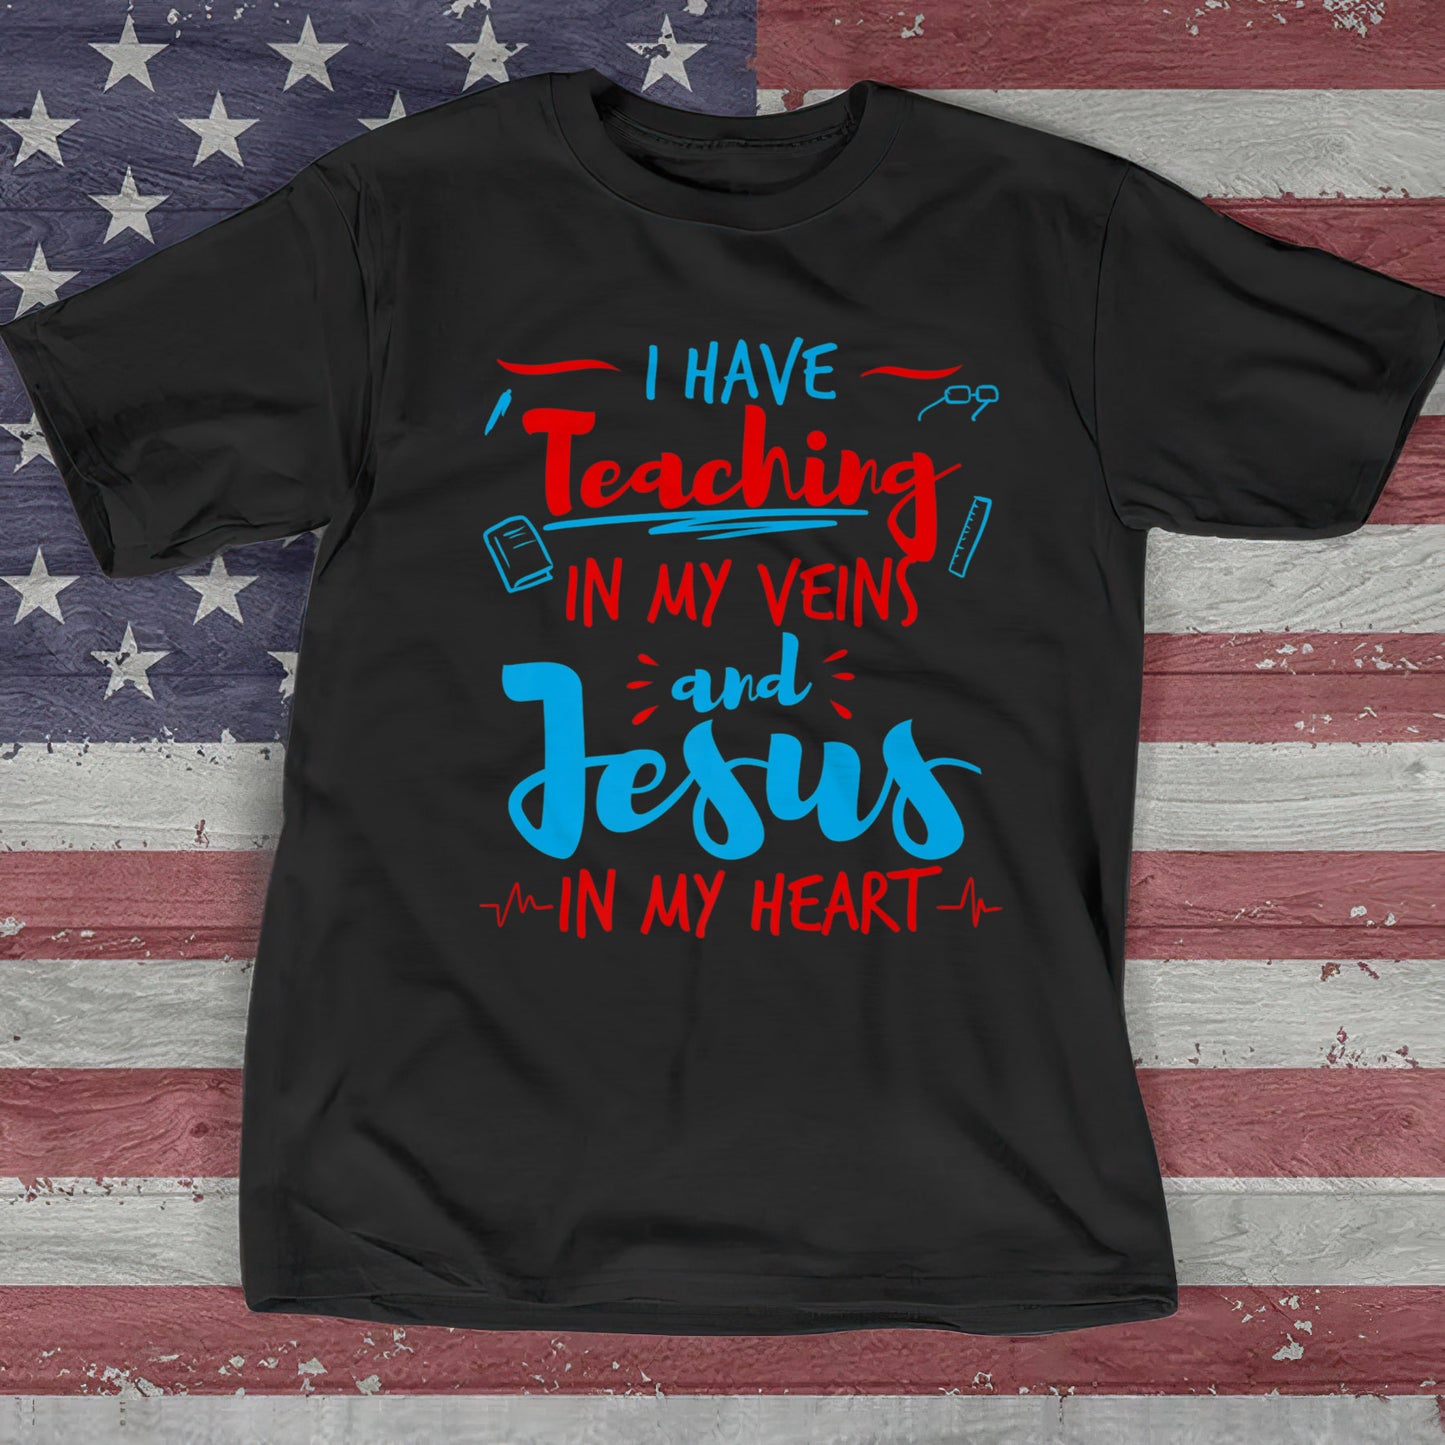 I Have Teaching In My Veins And Jesus - Cool Christian Shirts For Men & Women - Ciaocustom